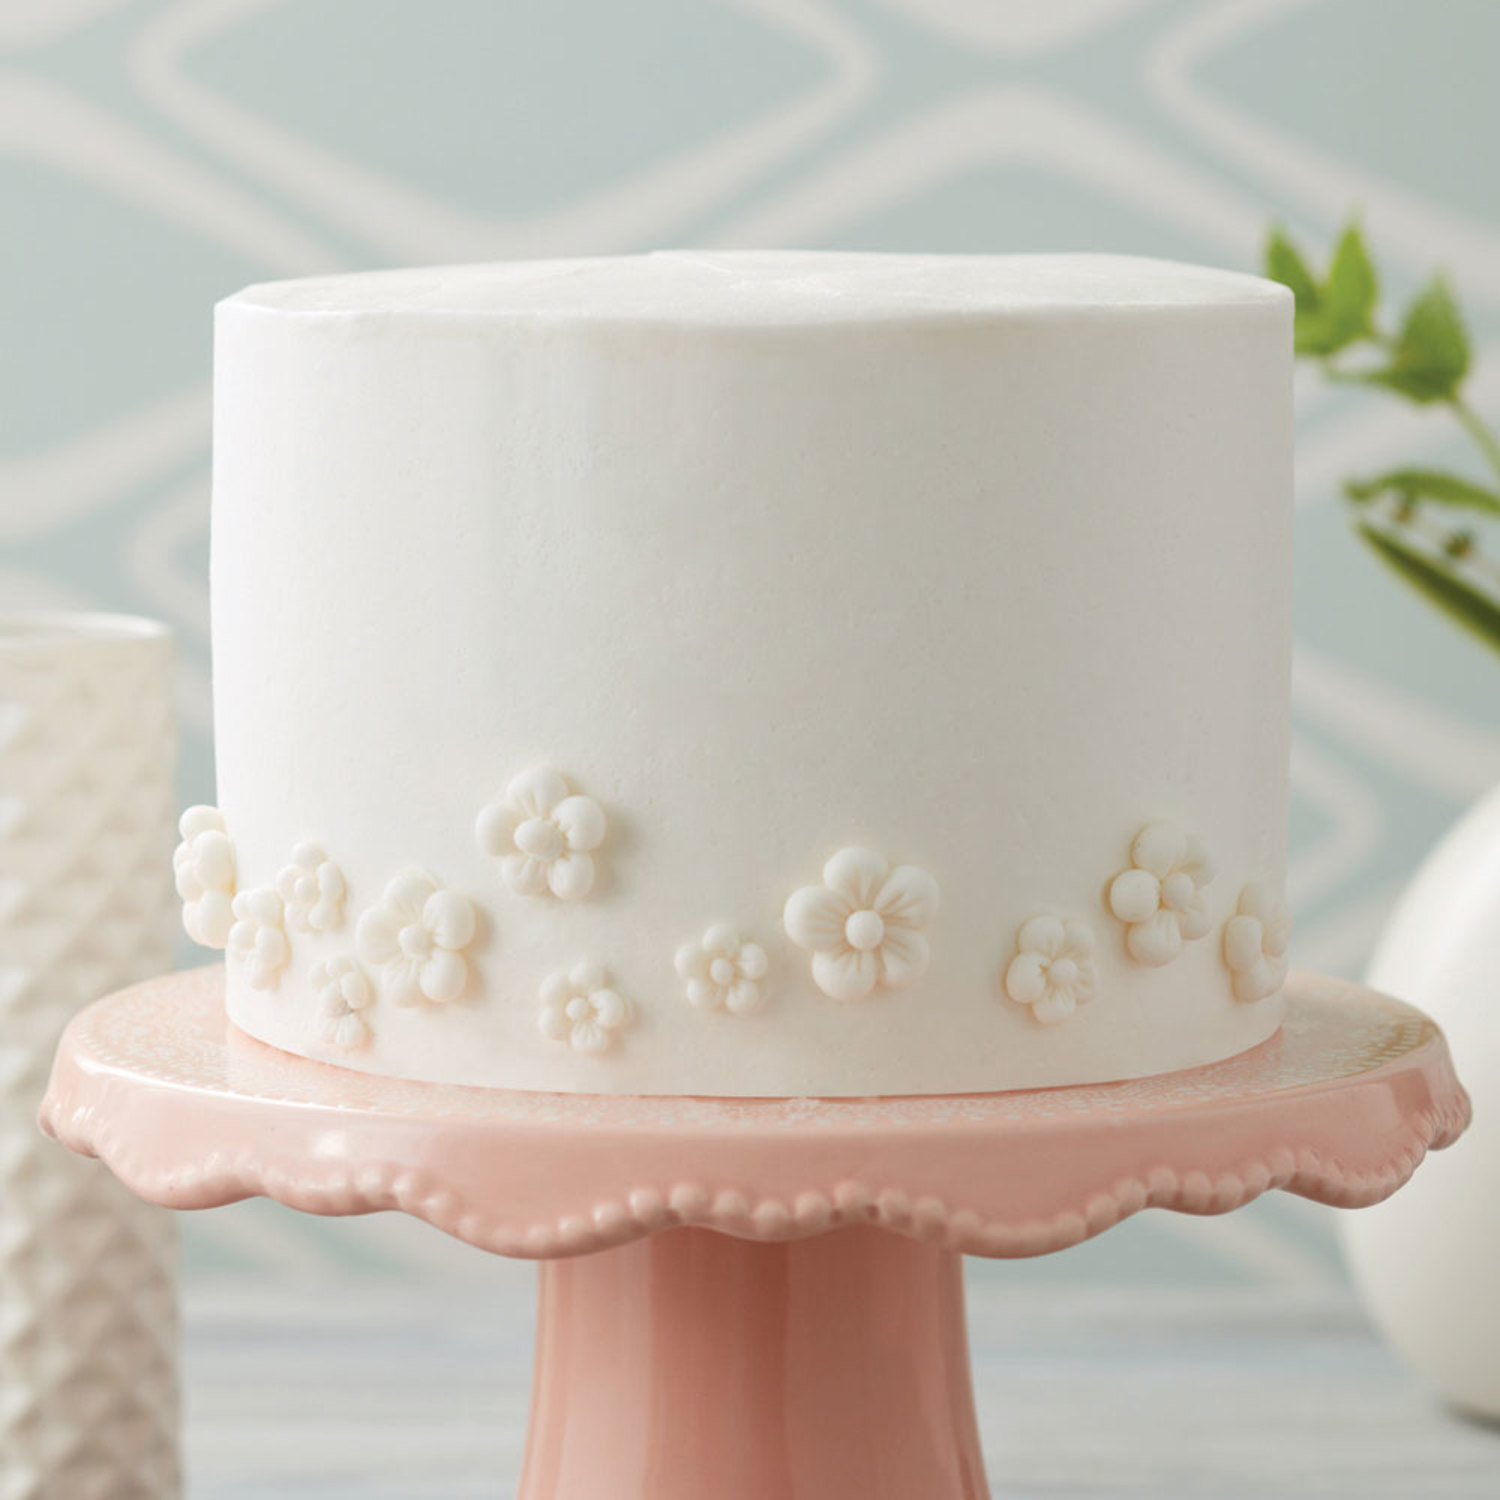 White Cake with Candlelight Icing - 7